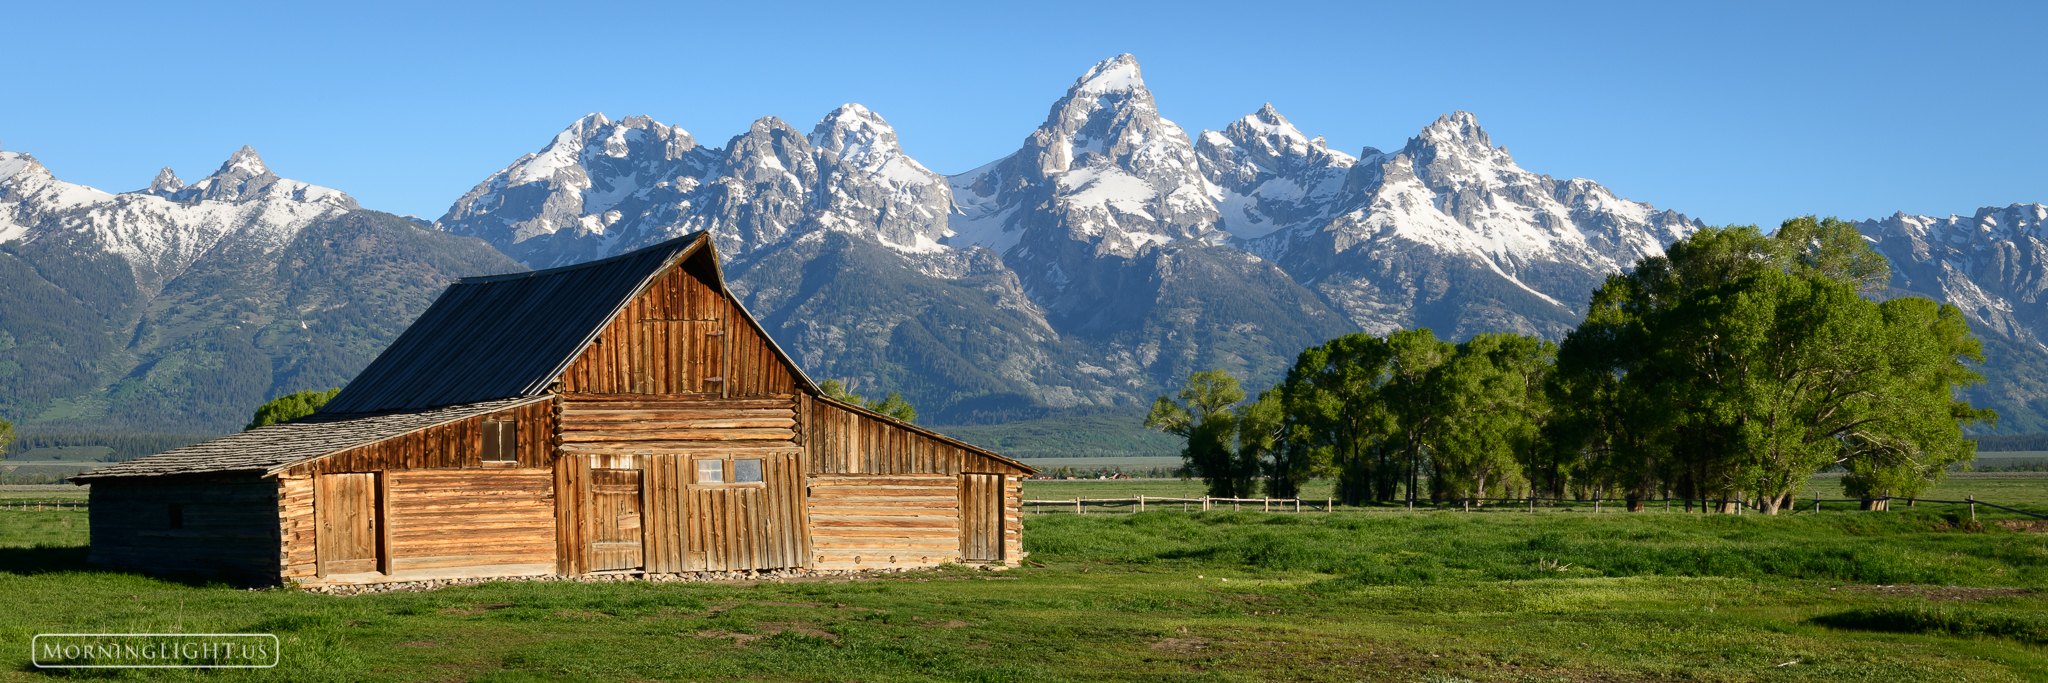 The idyllic barn at Grand Teton National Park during a gorgeous summer morning.